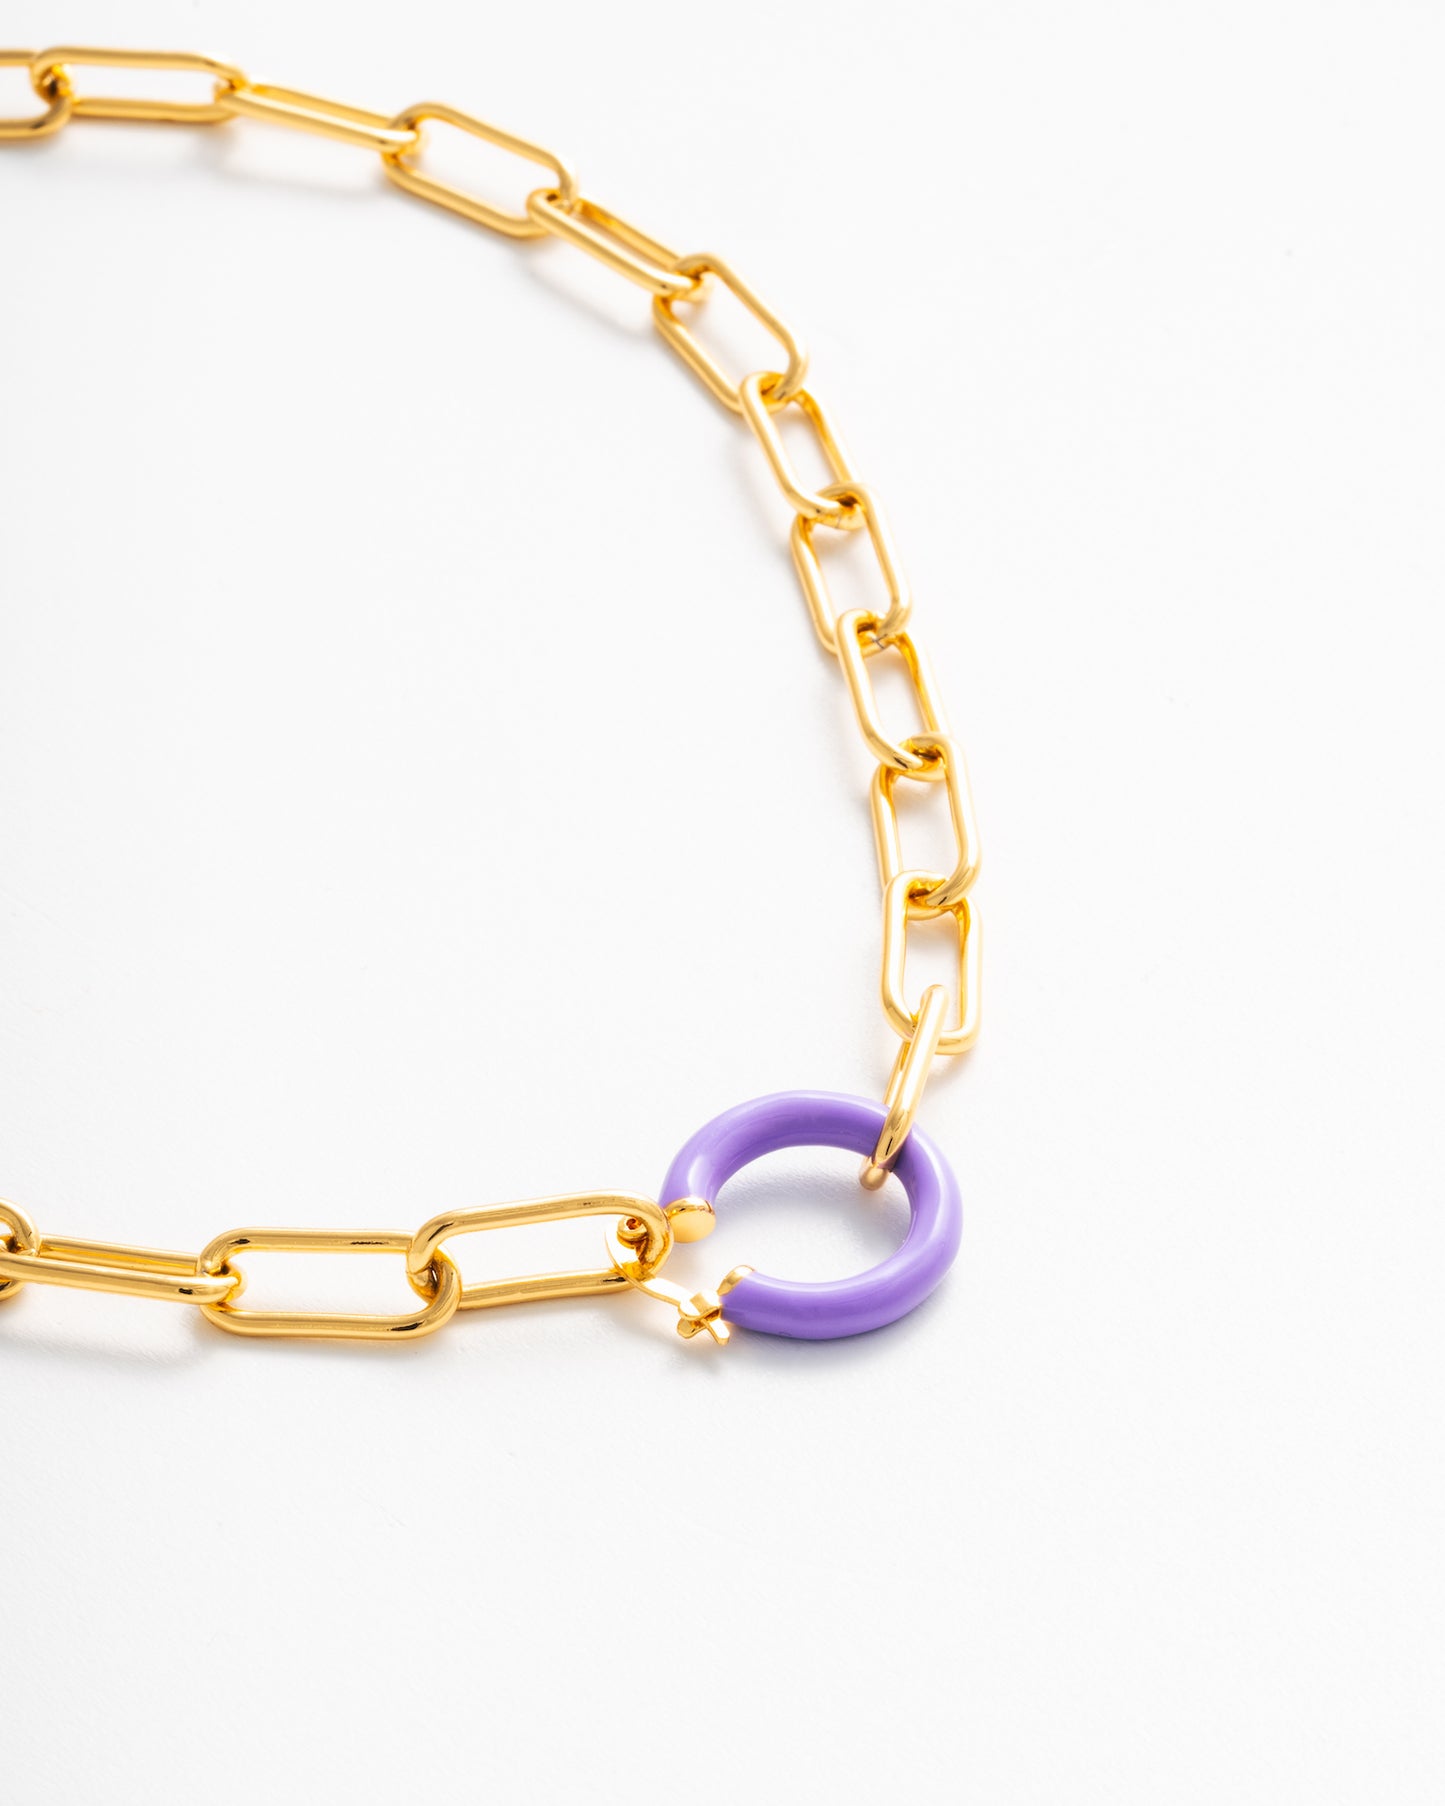 Lev Necklace with Lilac Clasp